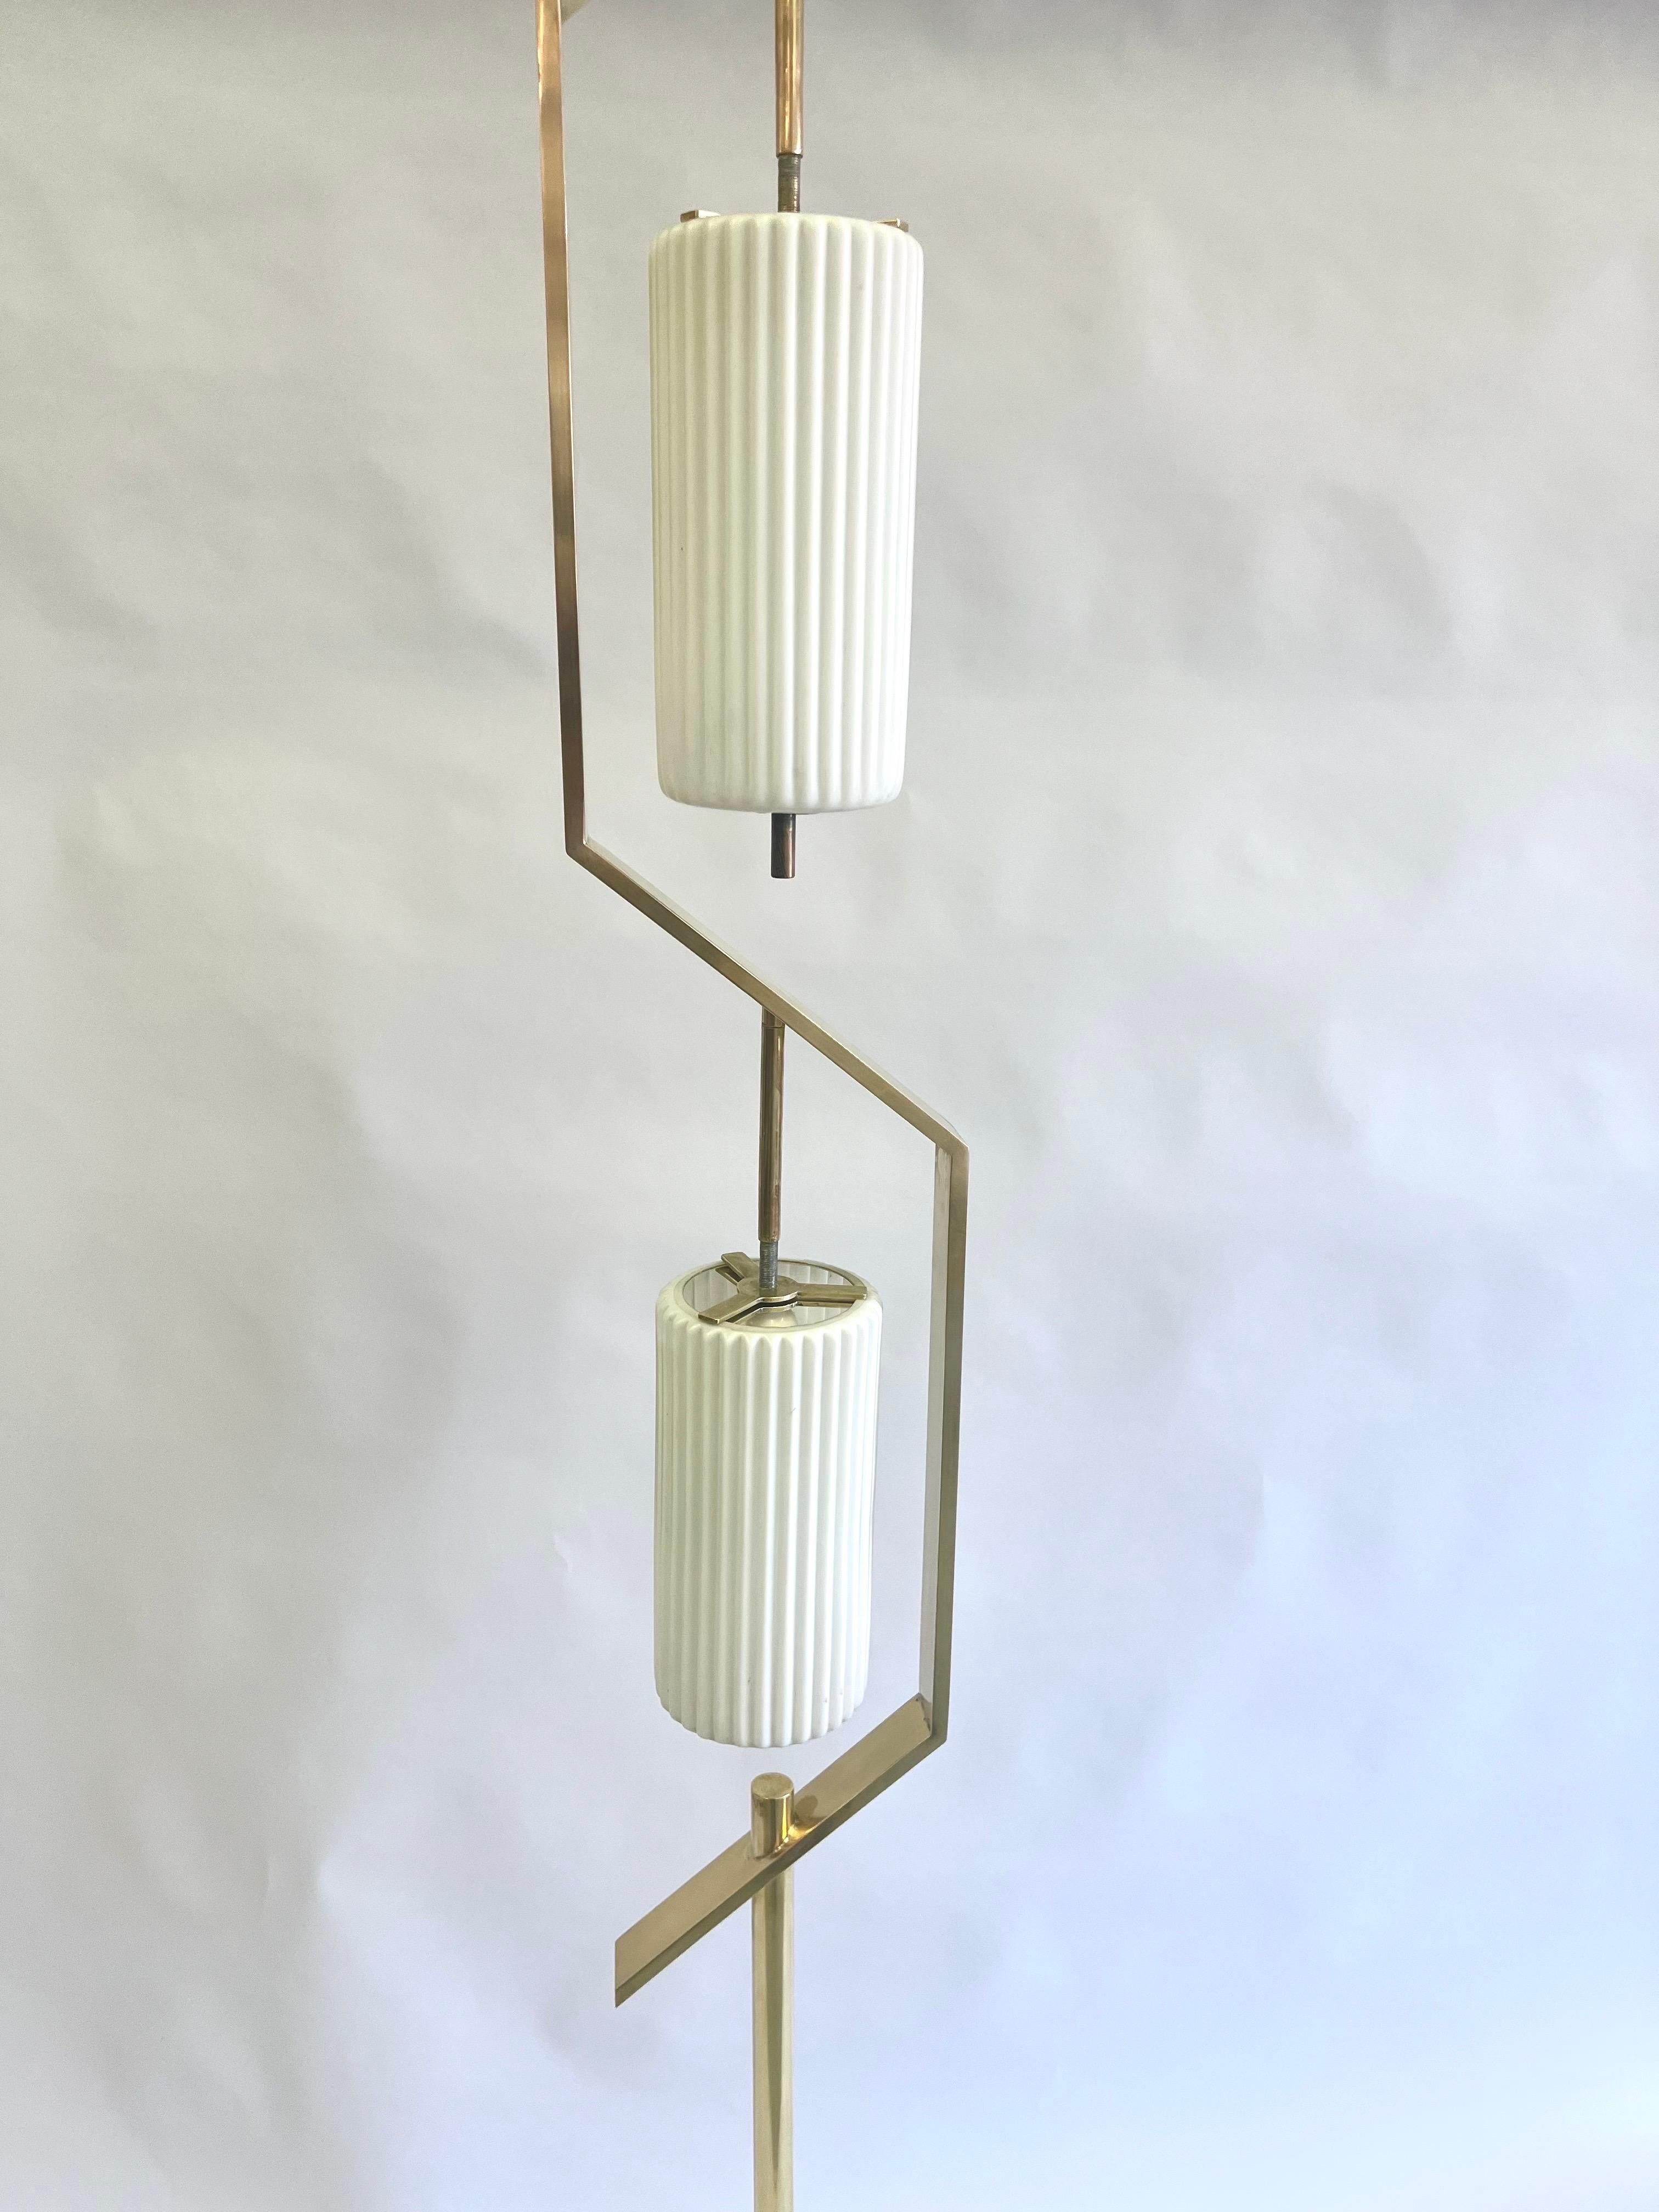 Hand-Crafted Rare & Iconic Italian MId-Century Floor Lamp #256 by Angelo Lelli for Arredoluce For Sale